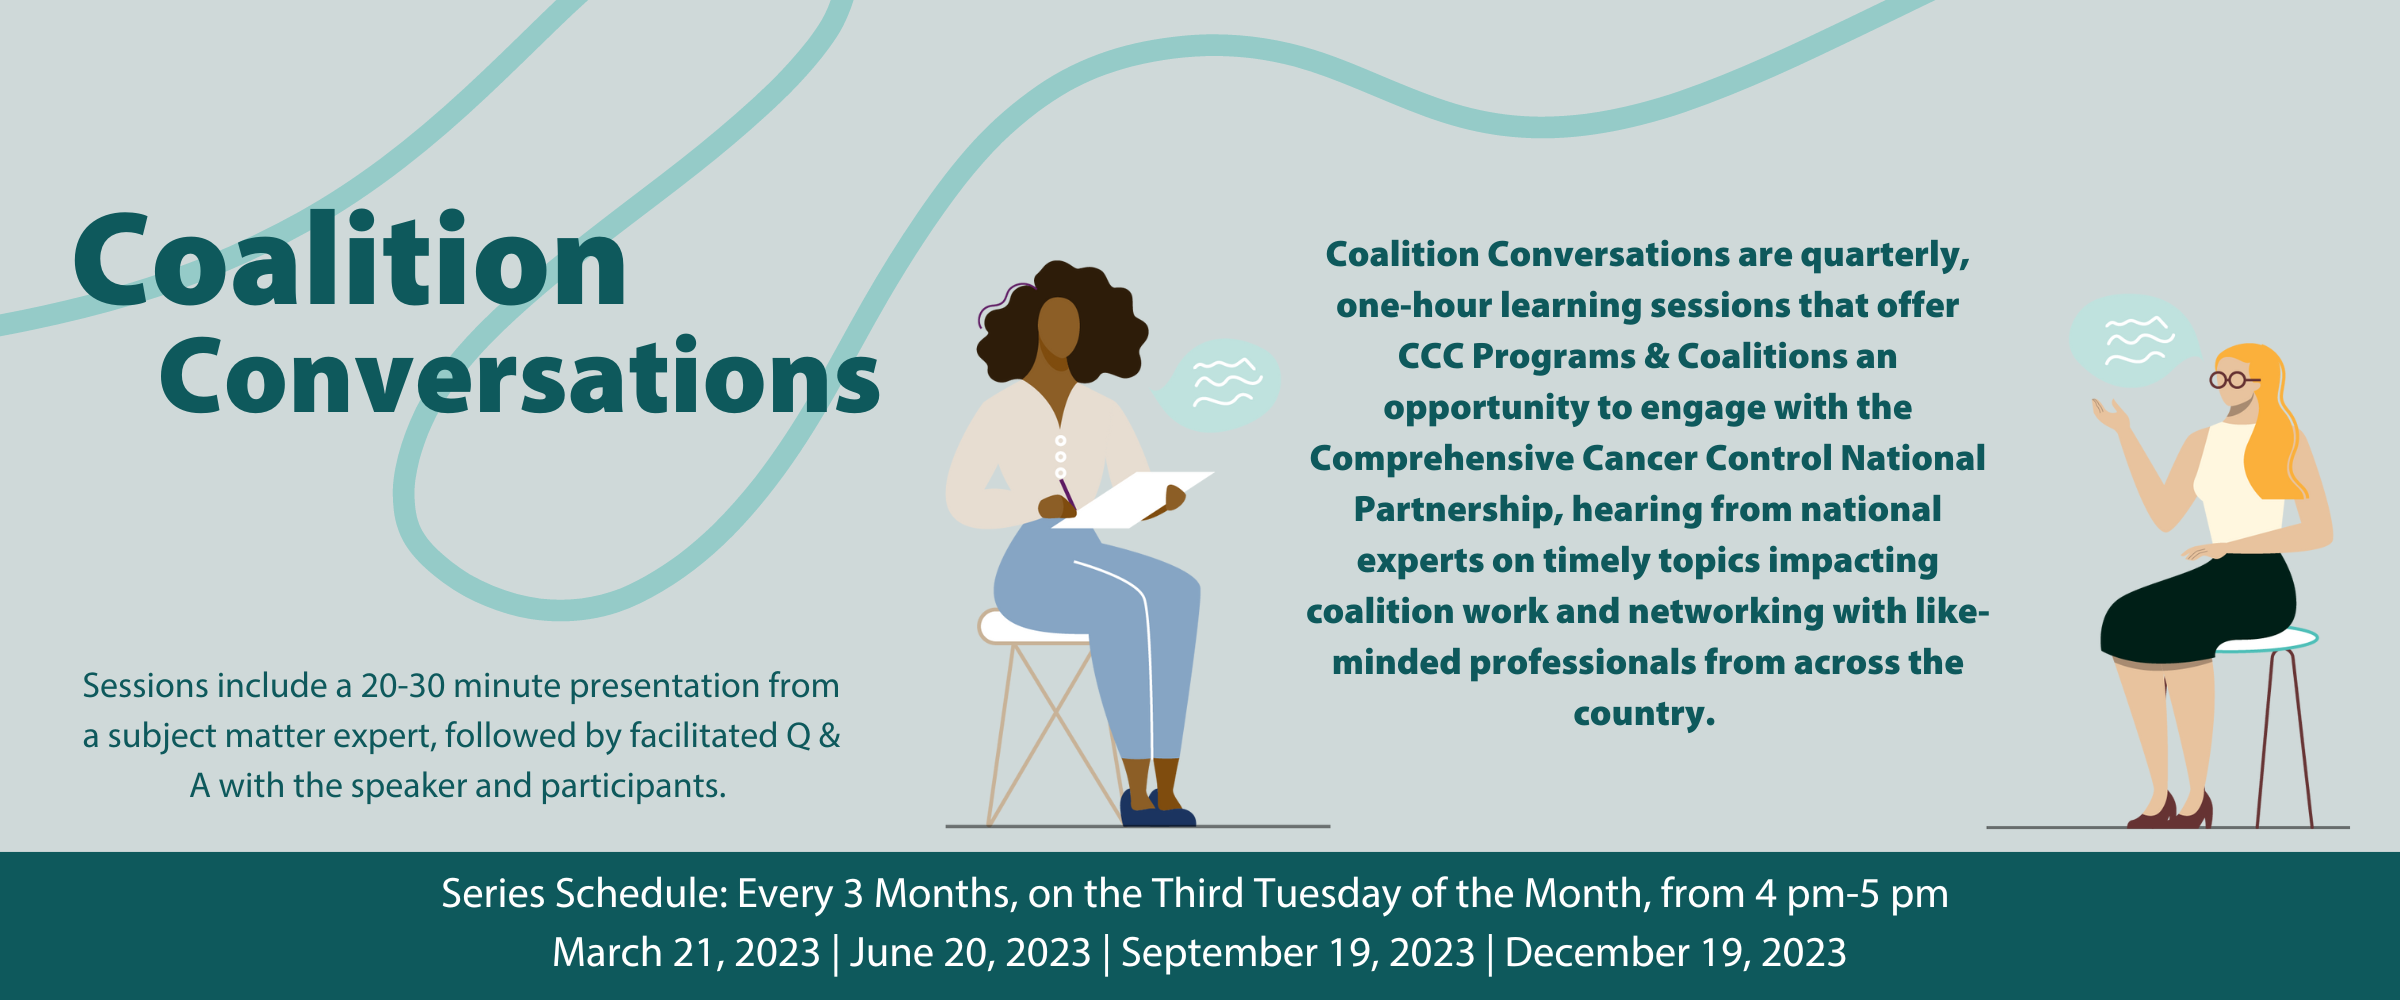 Coalitions Conversations are quarterly one-hour learning sessions. Click to learn more.